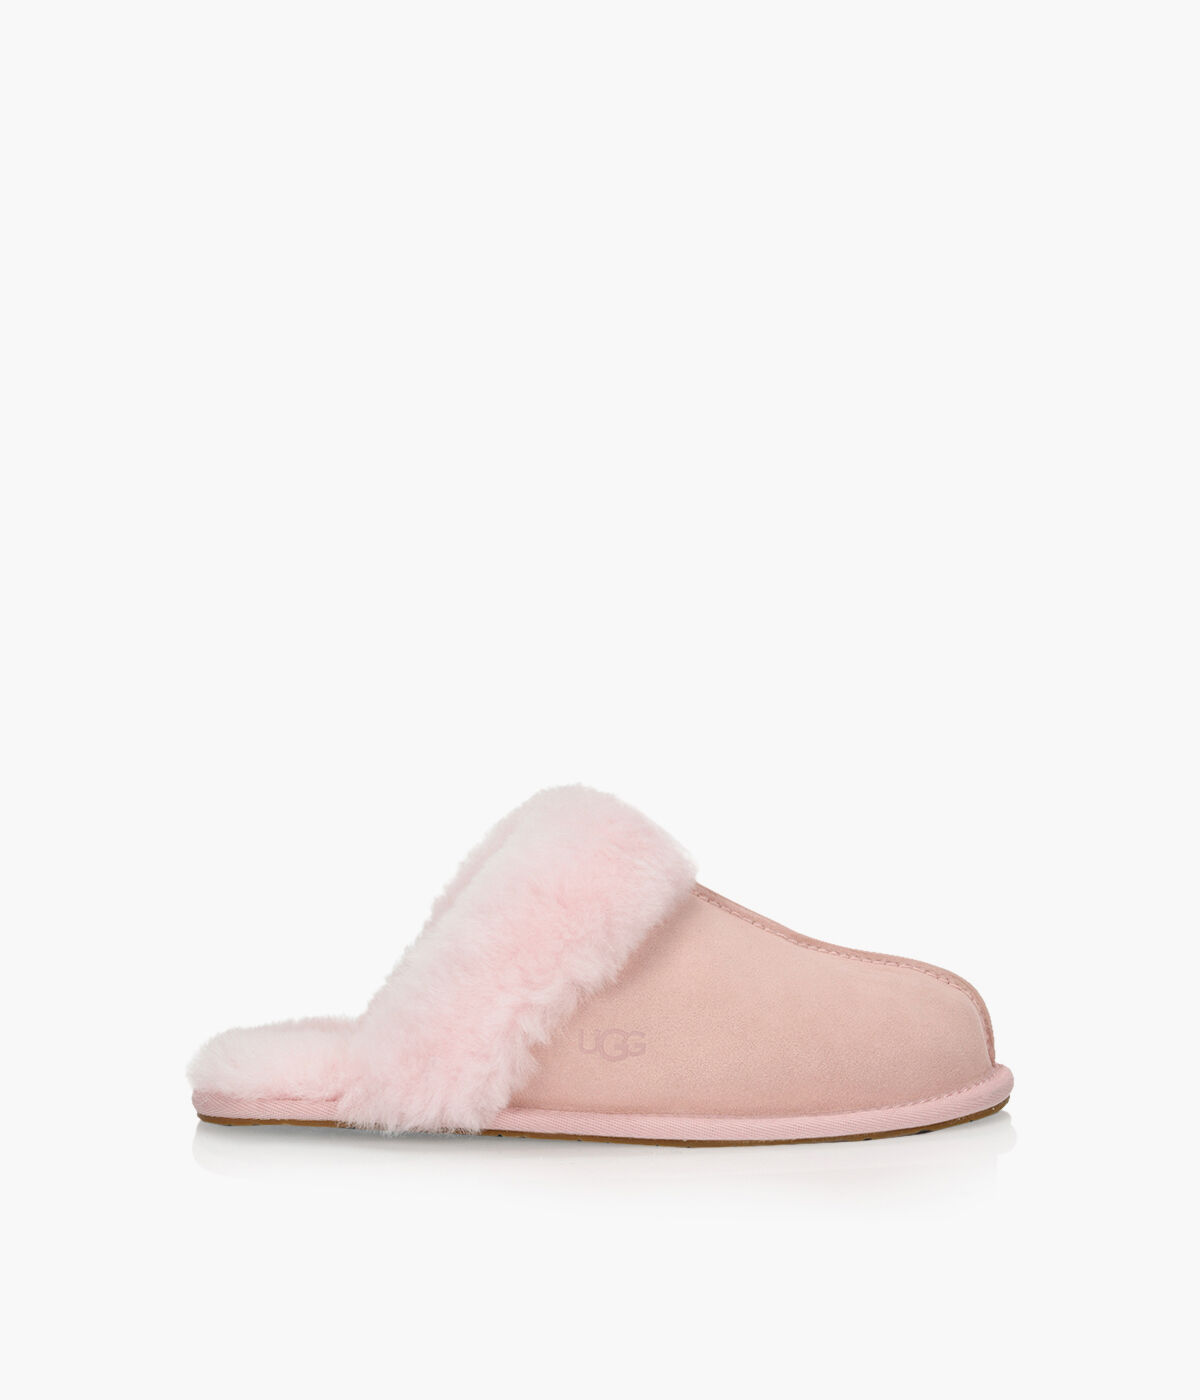 do ugg slippers run true to size